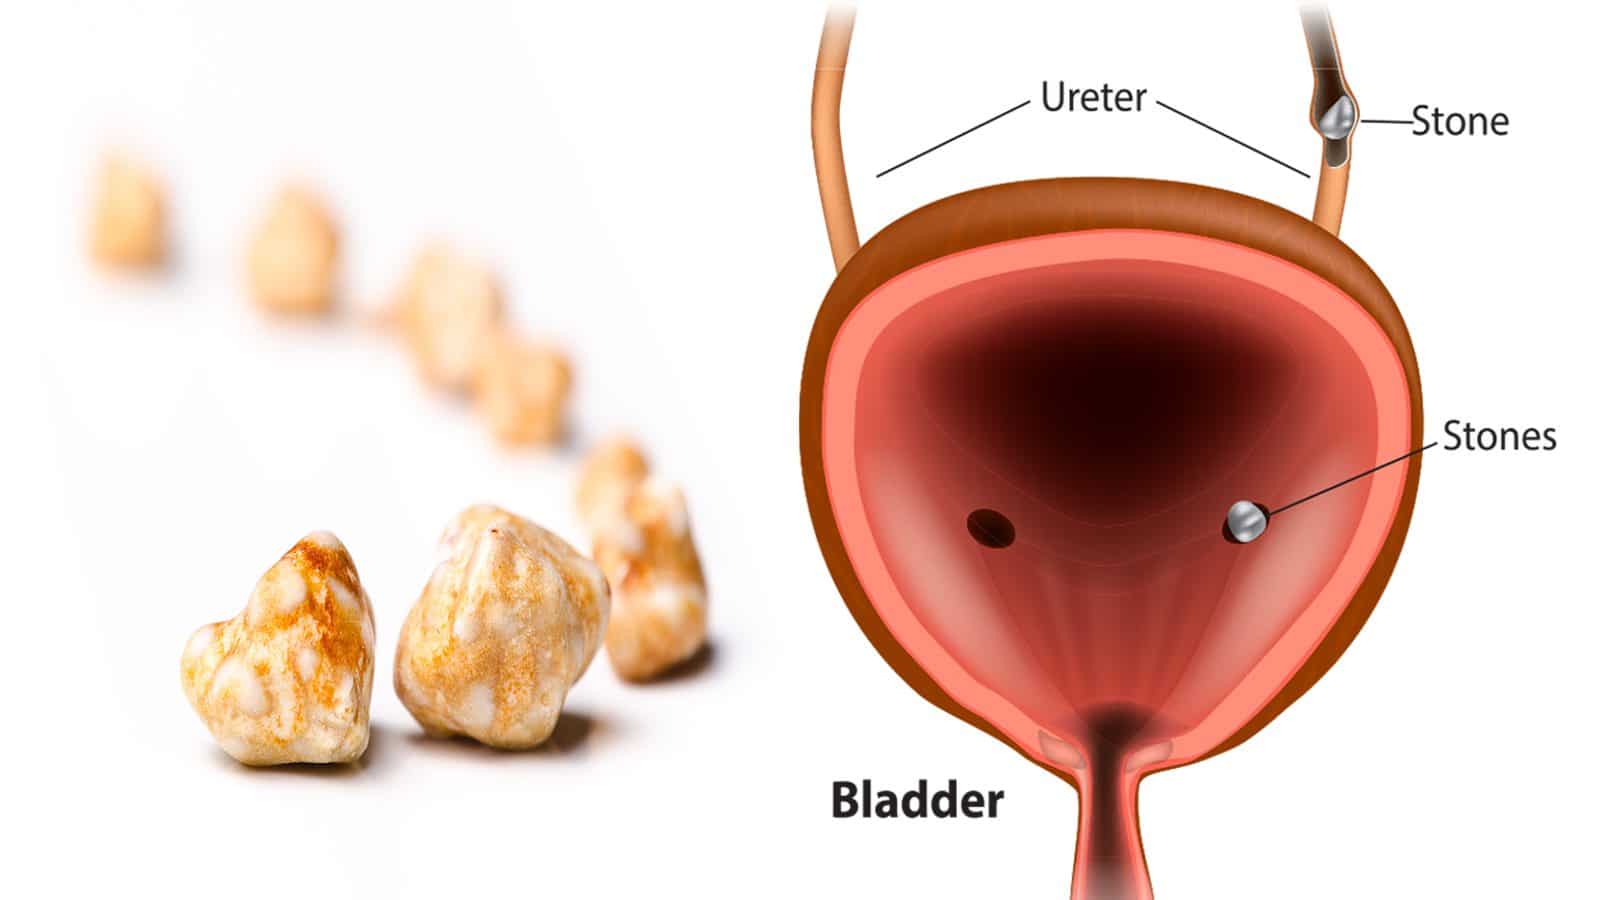 7 Things That Cause Bladder Stones (And How to Prevent Them)